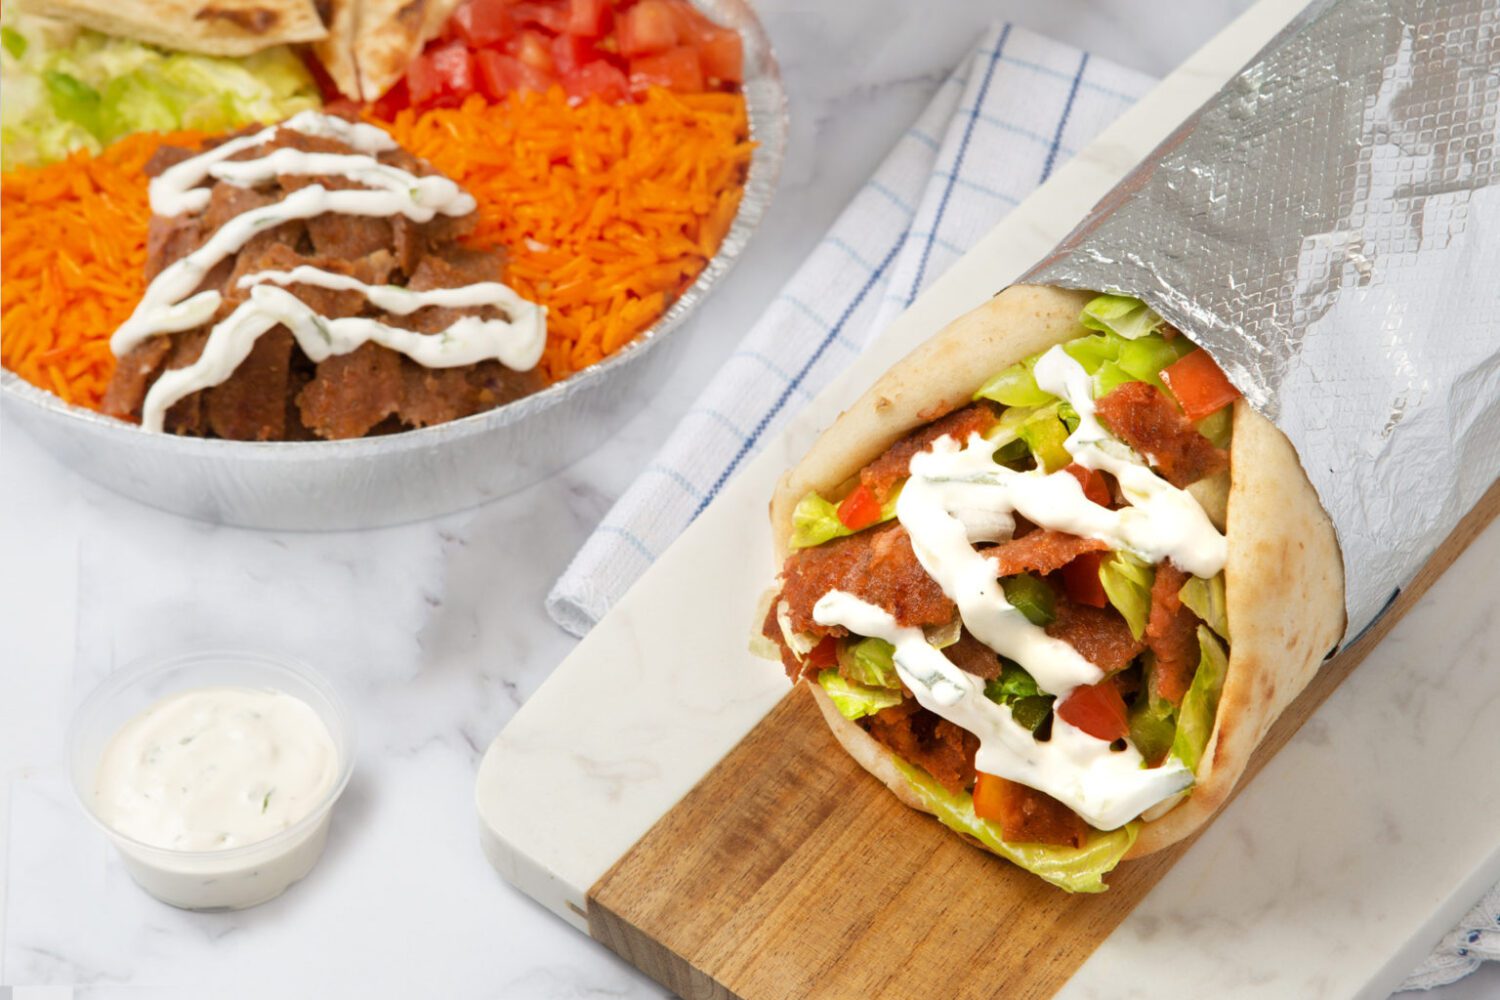 Introducing New Meatless Gyro for a Limited Time